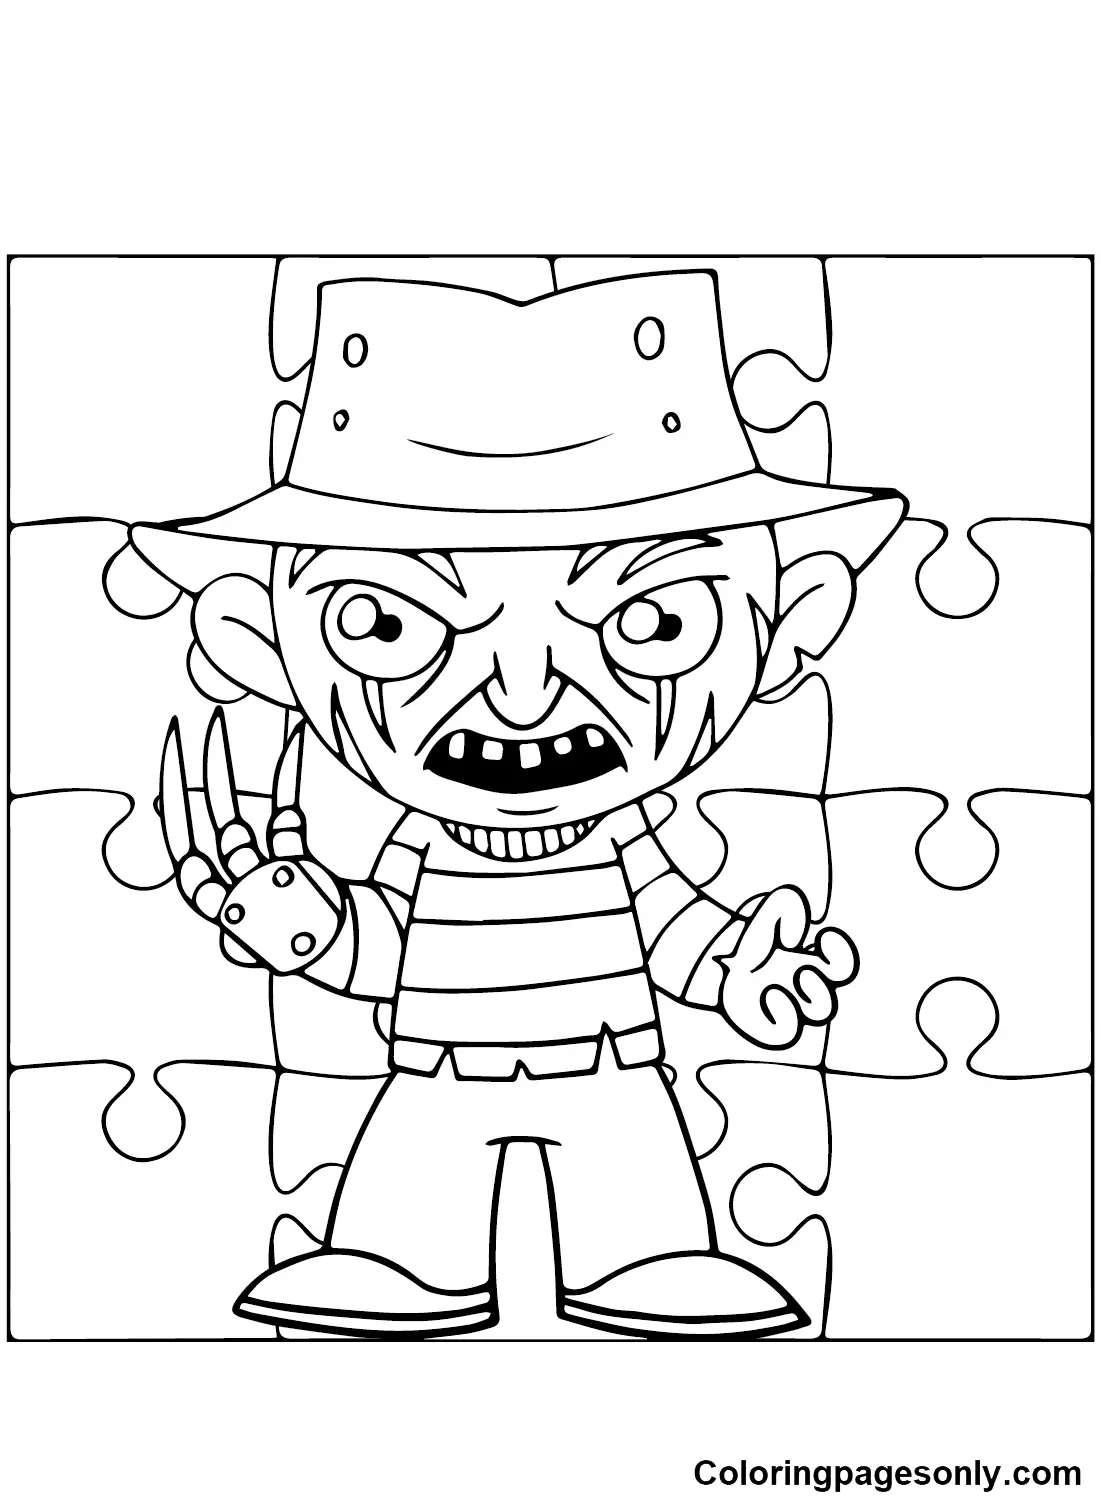 Freddy Krueger Coloring Pages